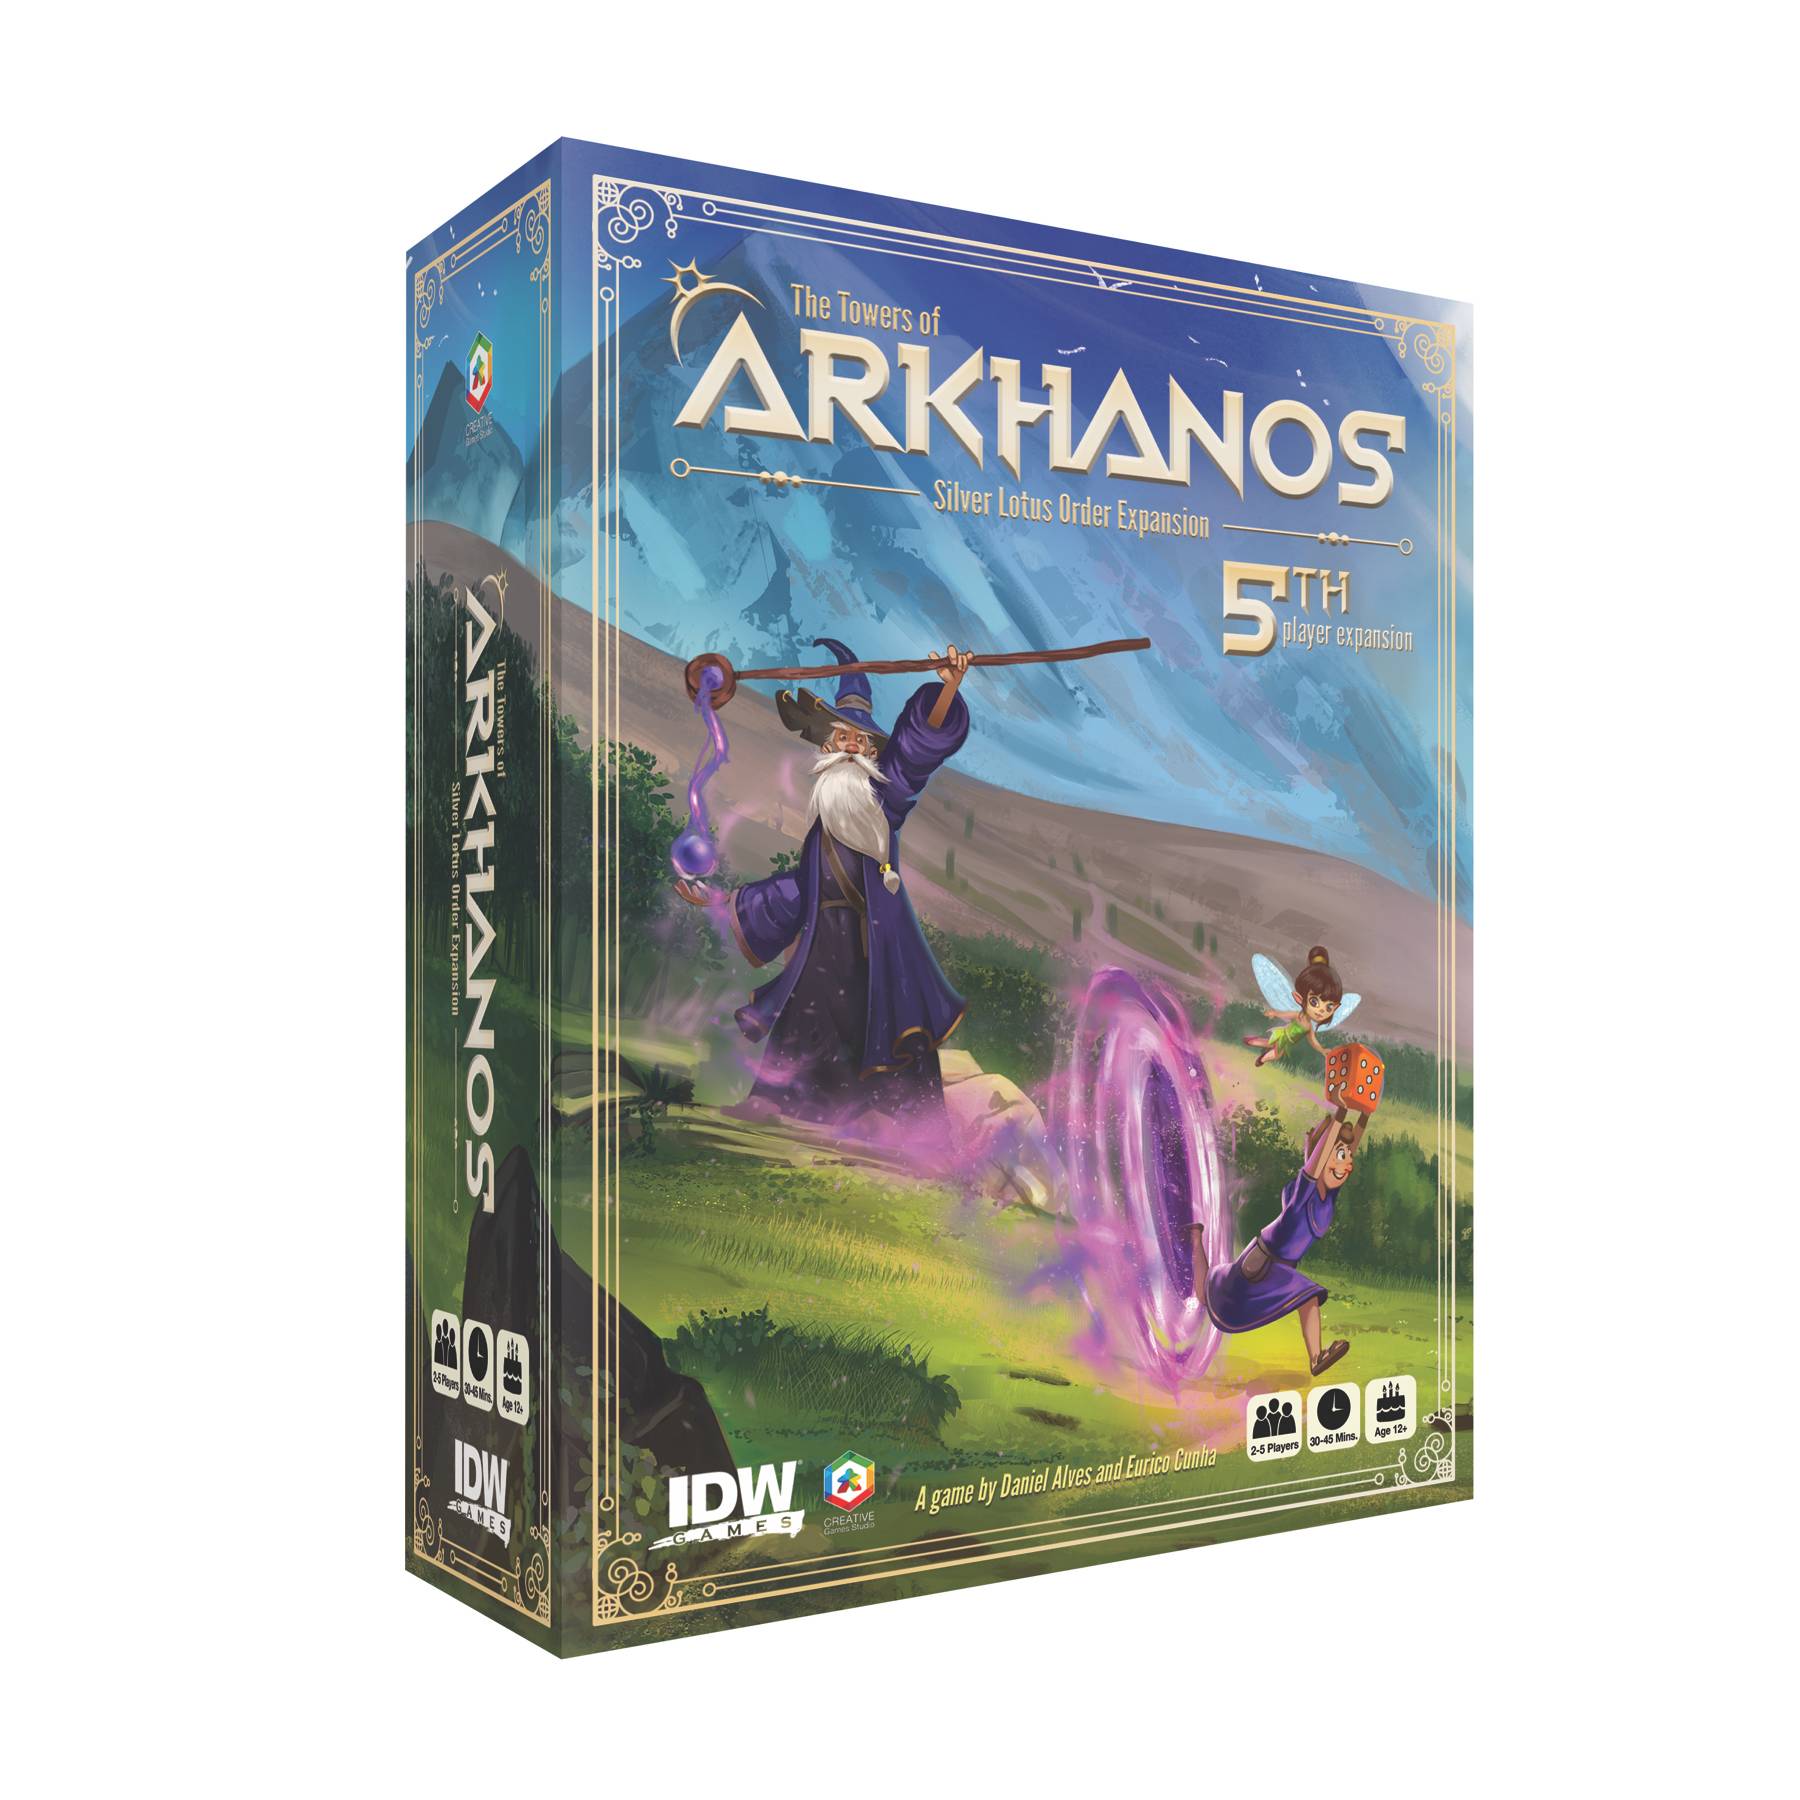 TOWERS OF ARKHANOS SILVER LOTUS ORDER 5TH PLAYER EXPANSION (